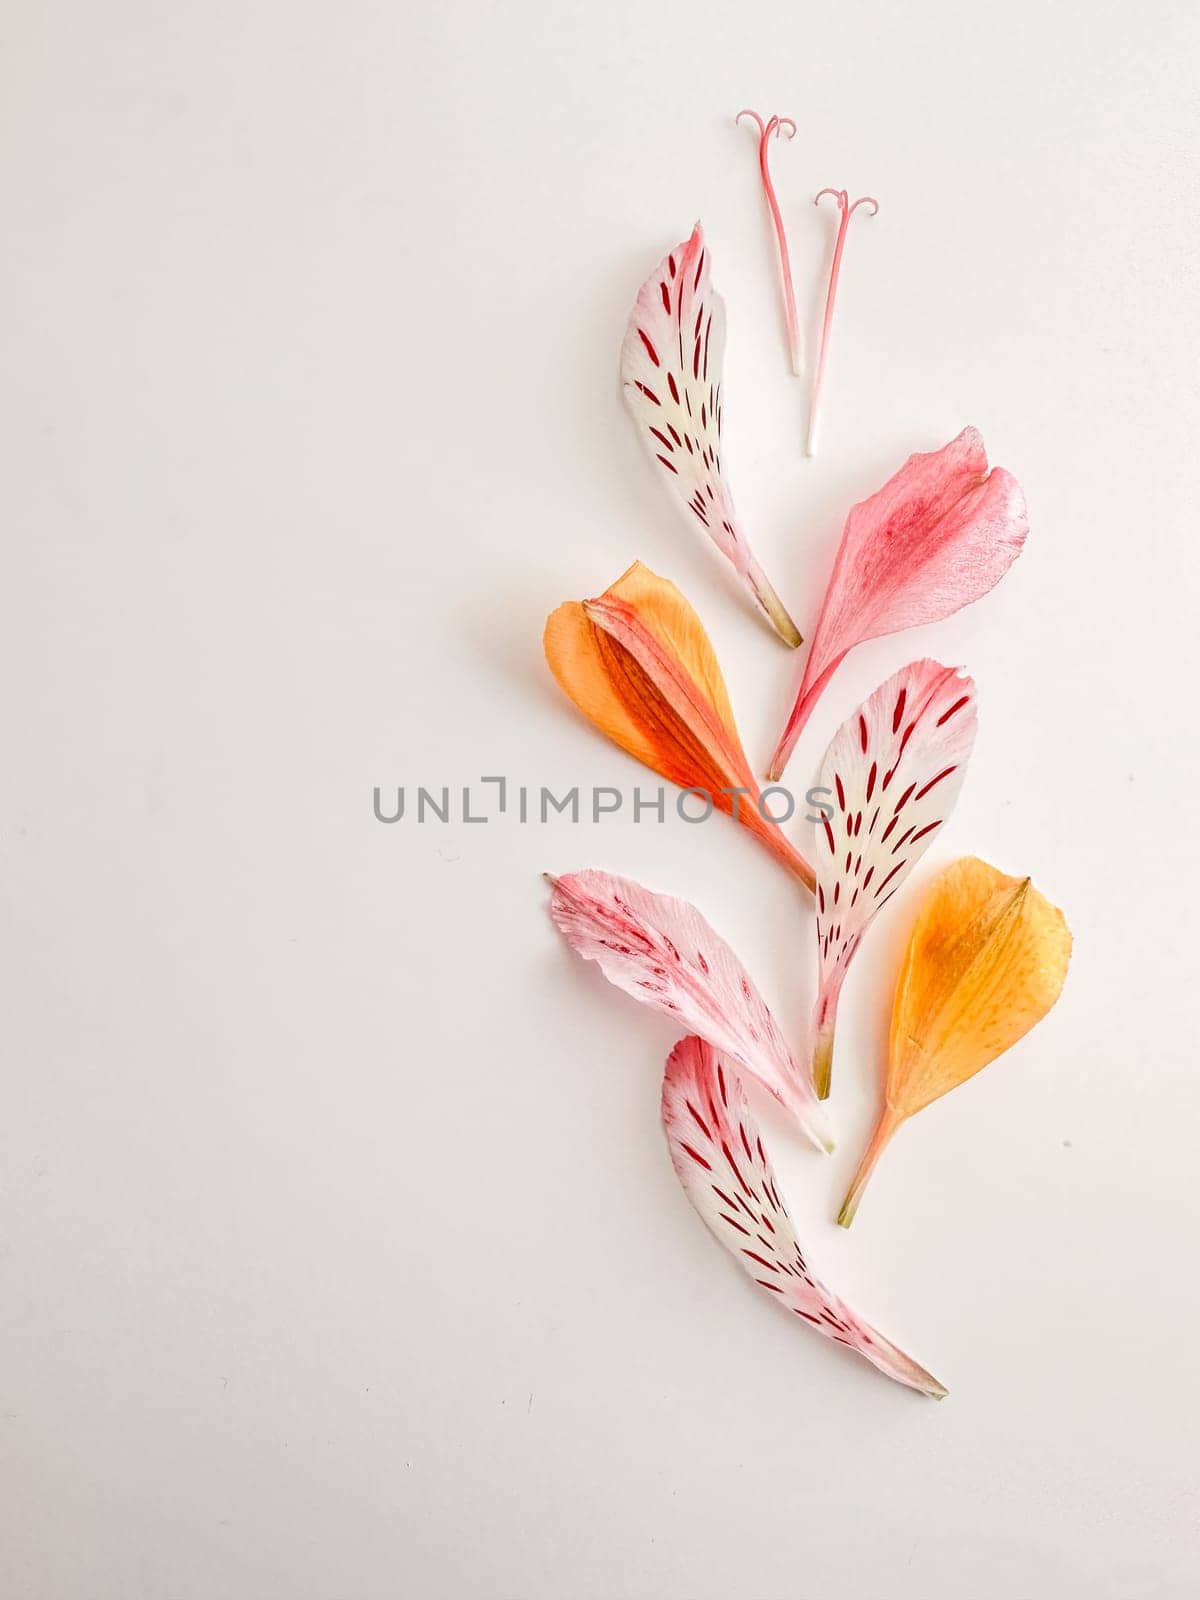 Pattern of flower petals on a white background with space for text by voktybre